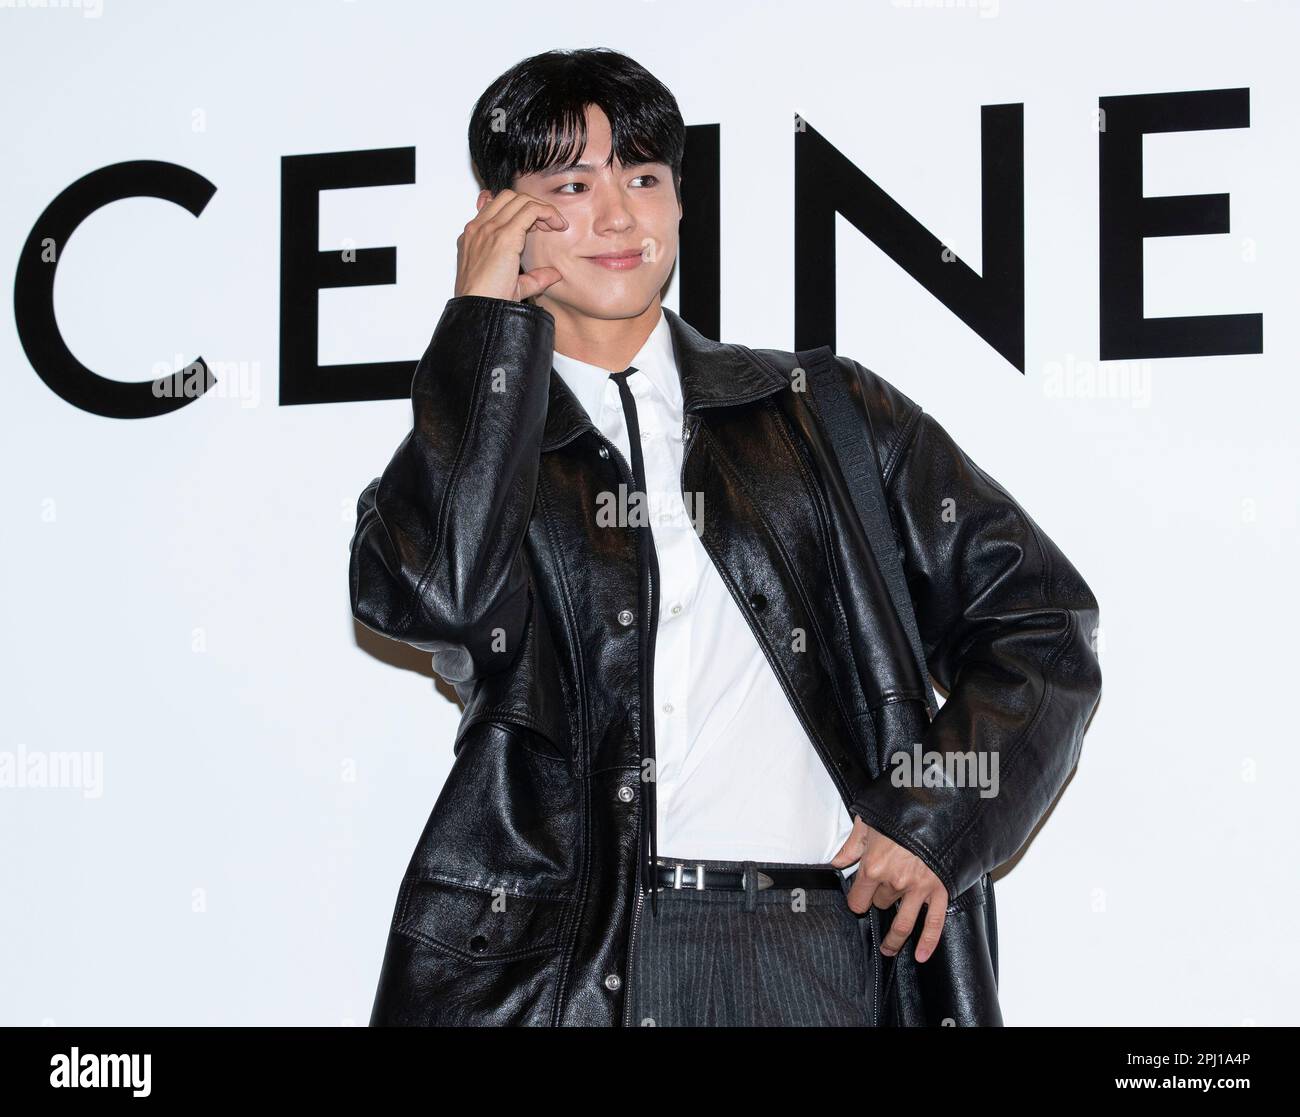 Park Seo-joon is another cool guy in rich lady Chanel jackets